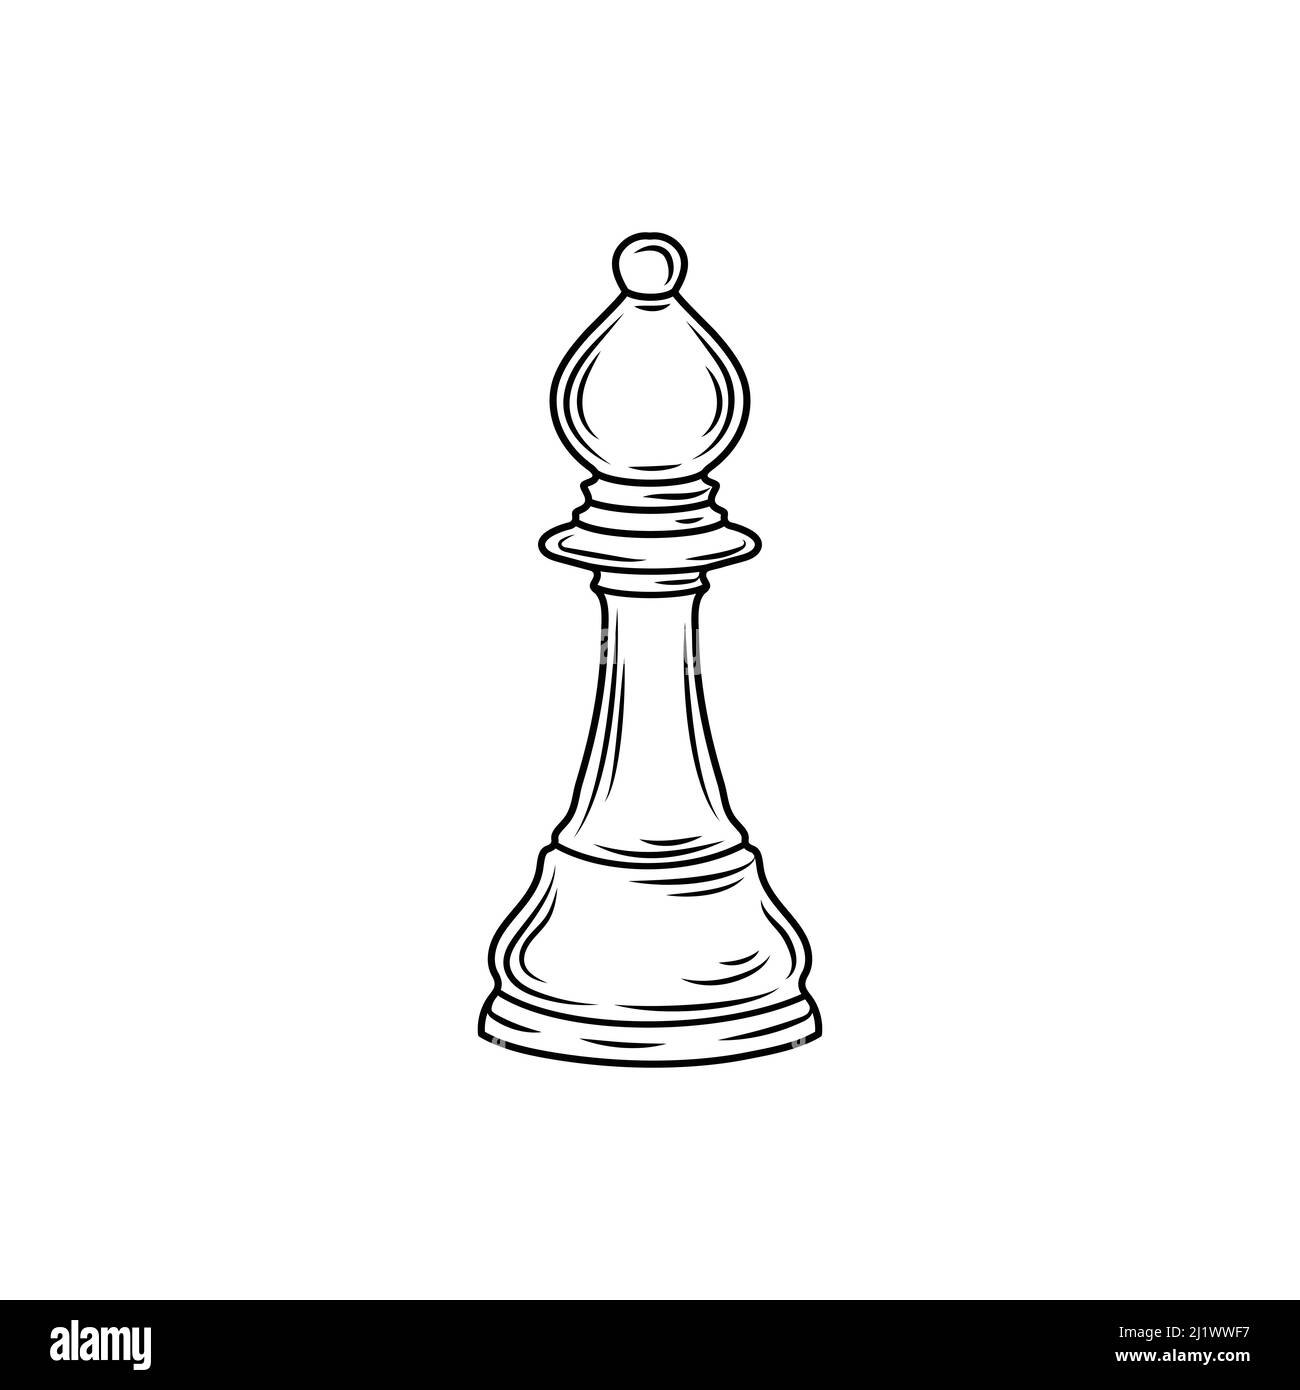 Handdrawn sketch of chess piece. Chess pieces. Chess.